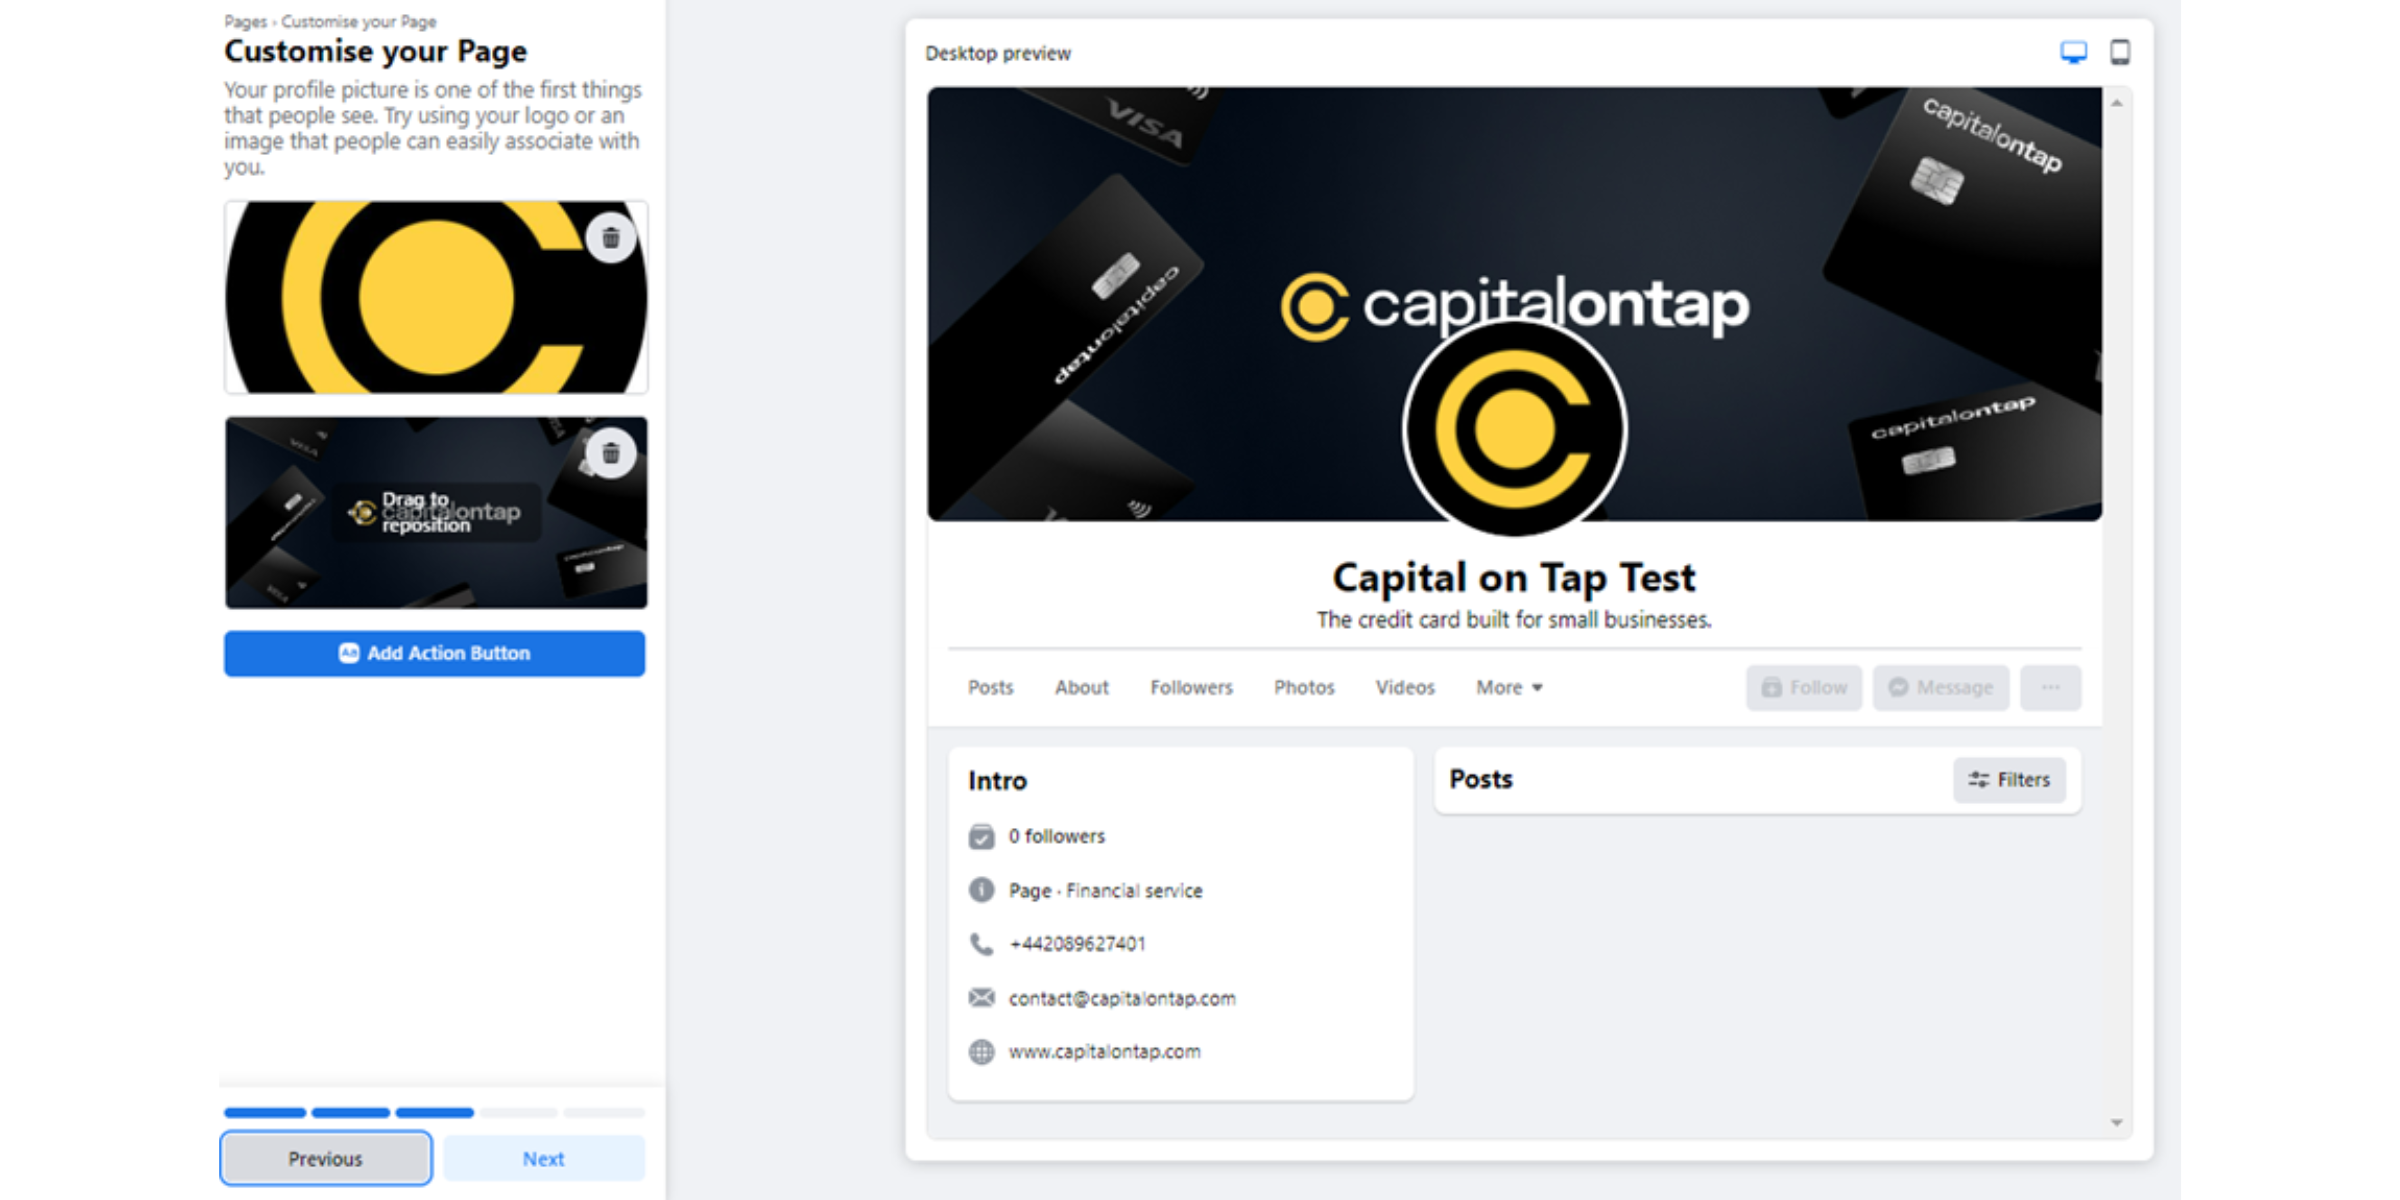 The image shows a screenshot of the customise your page bar on Facebook using the Capital on Tap test page